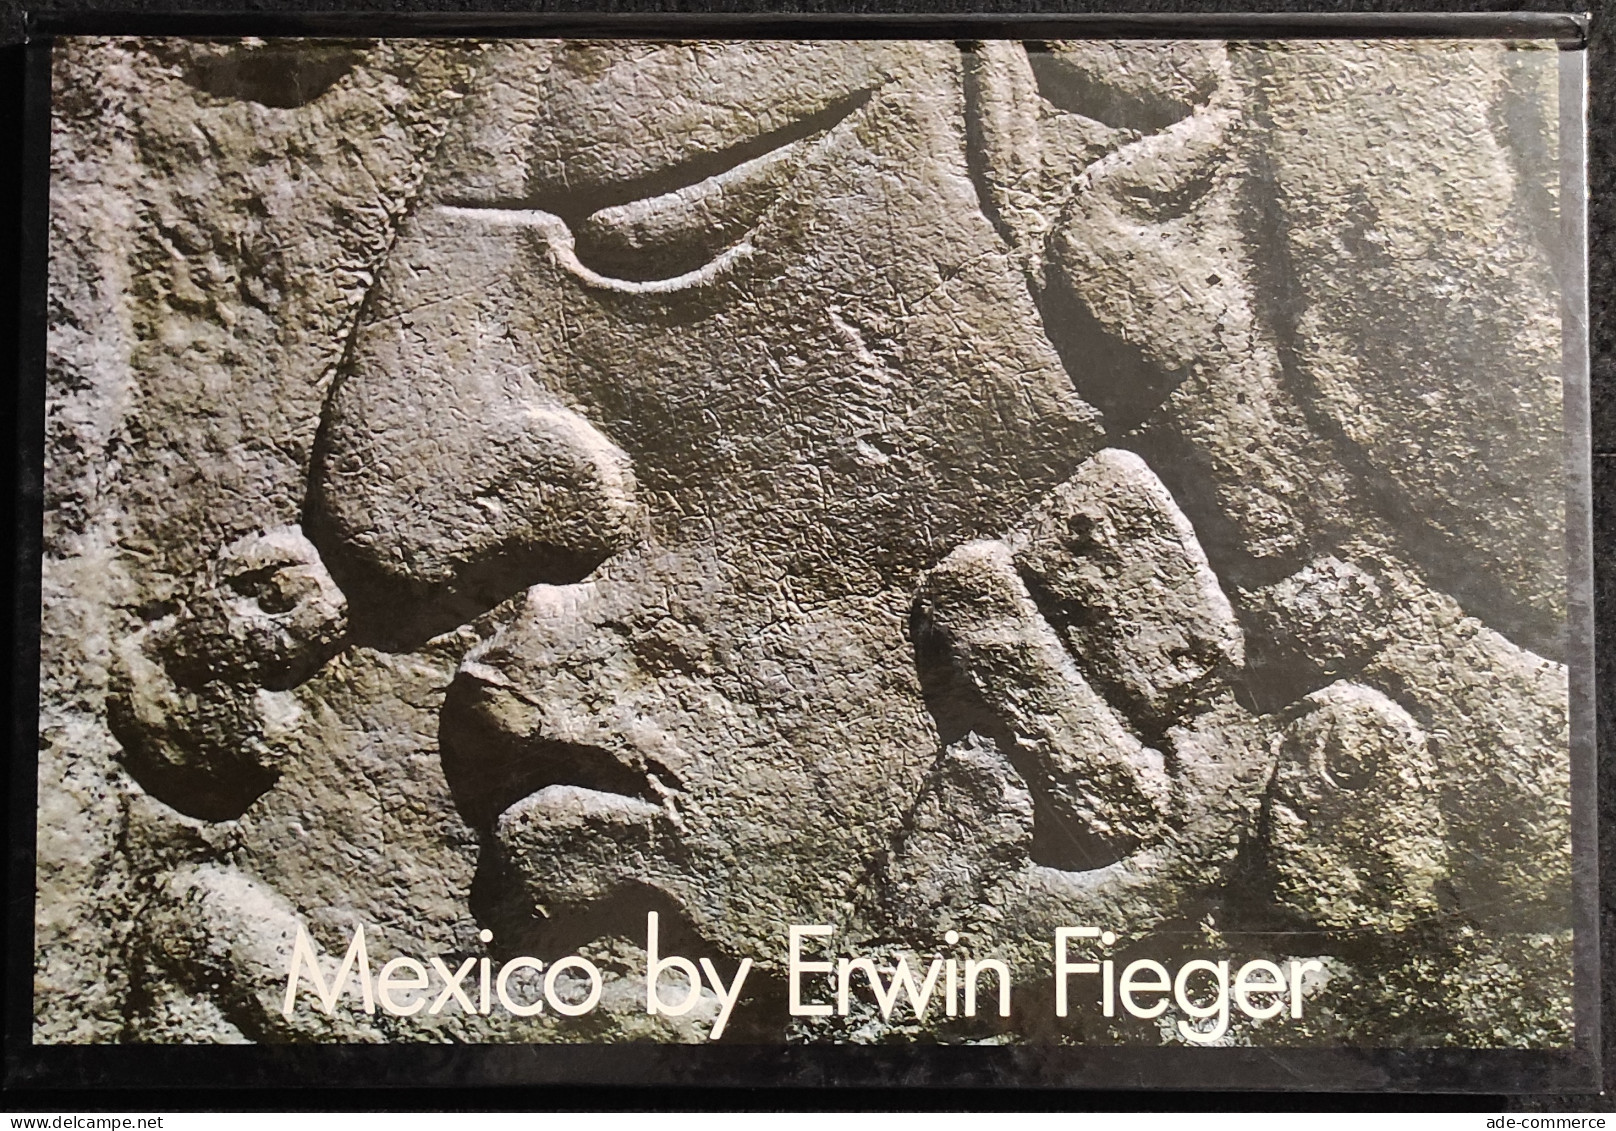 Mexico By Erwin Fieger - 1986 - Fotografia - Pictures